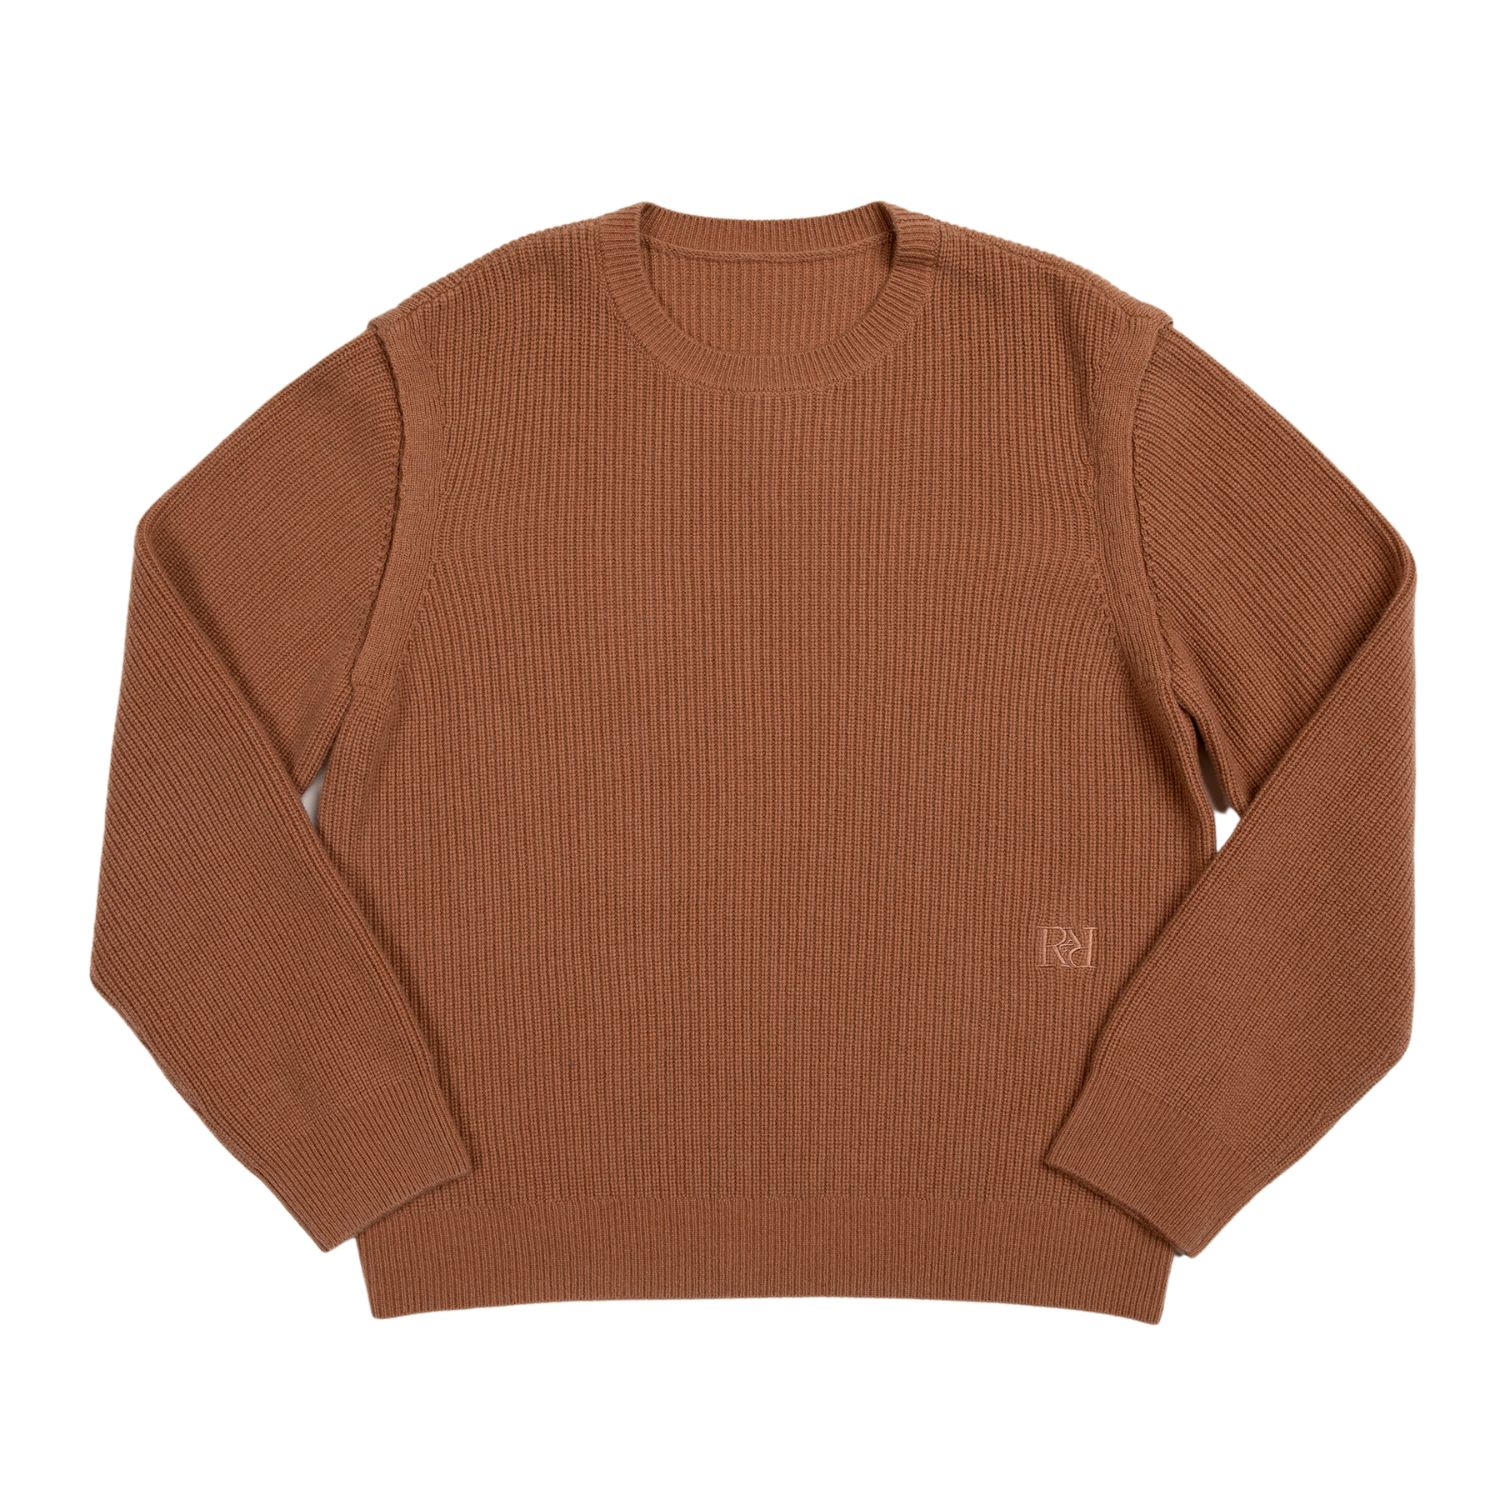 Women’s Brown Convertible Cashmere Sweater - Toast Large Rest & Relax